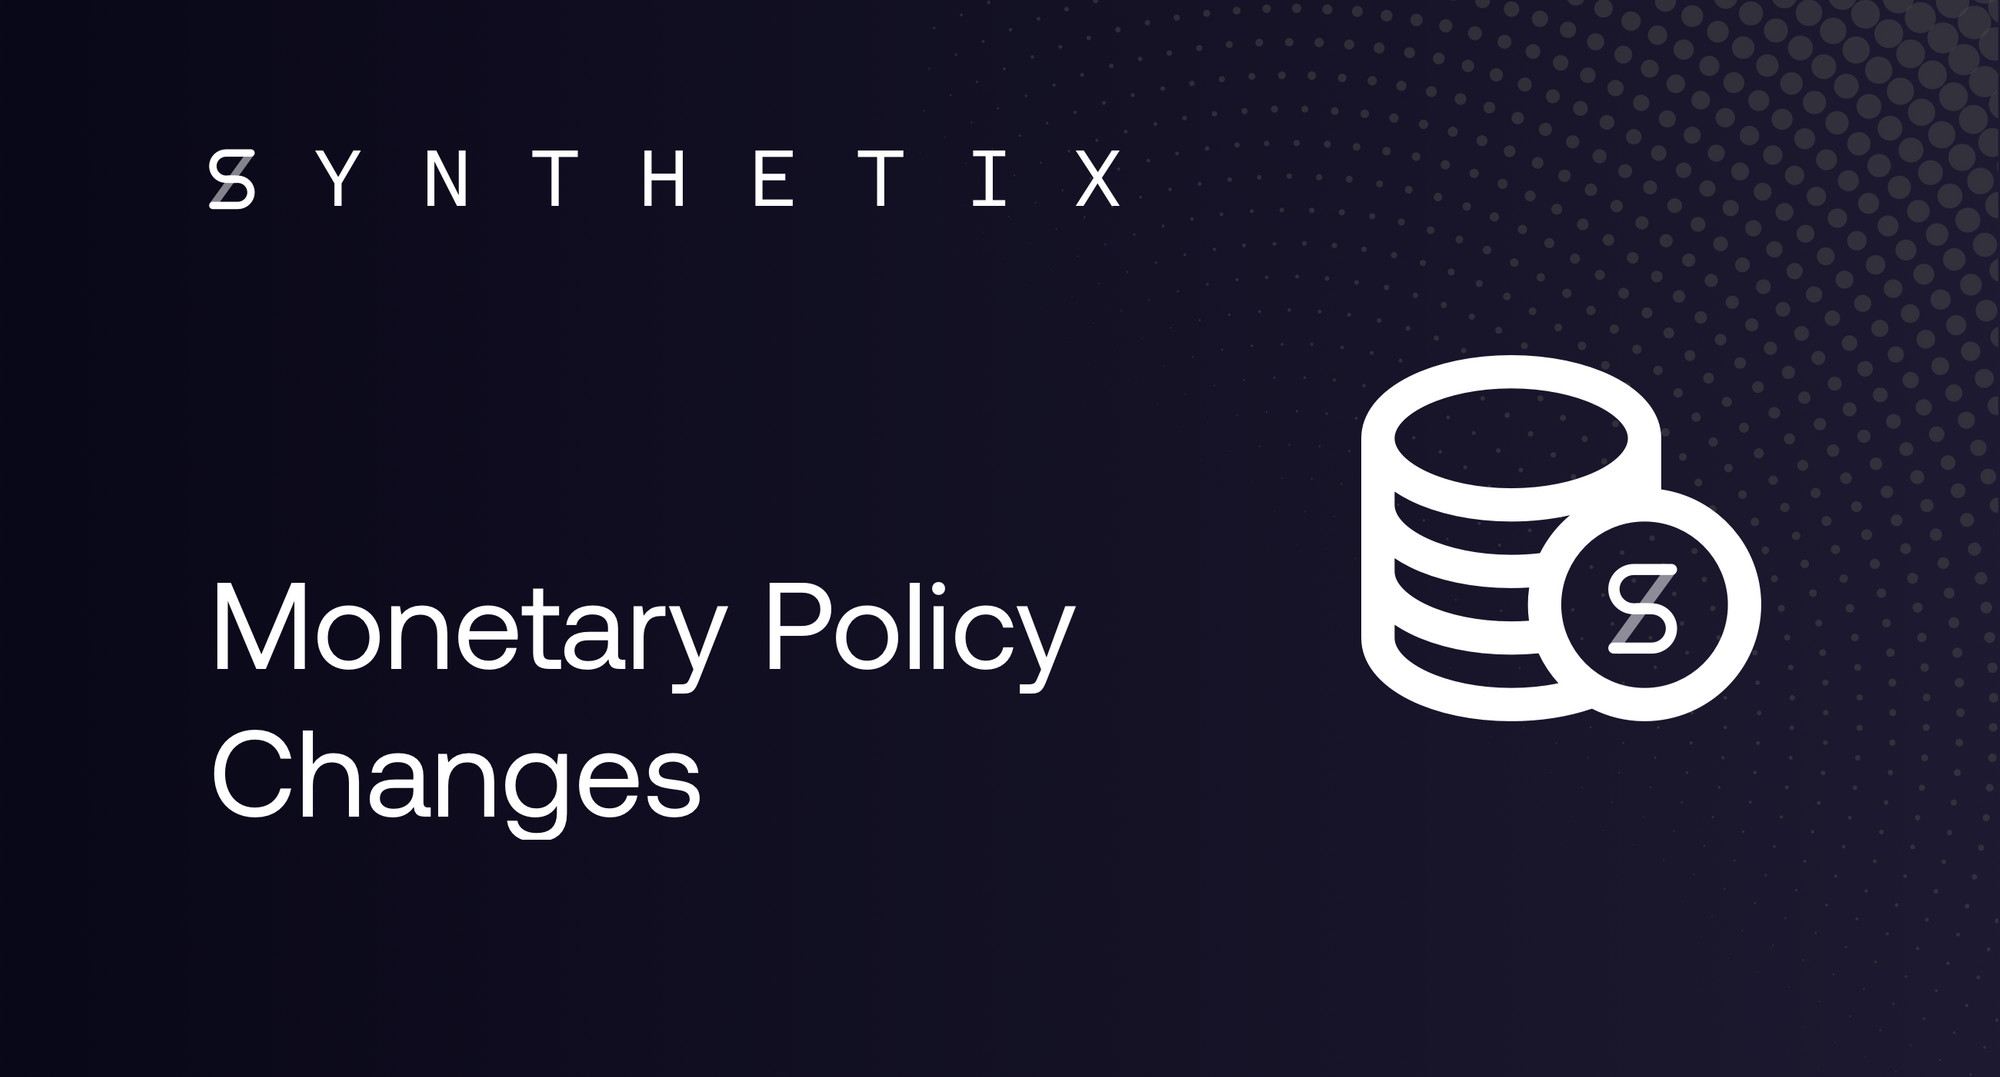 Synthetix Monetary Policy Changes